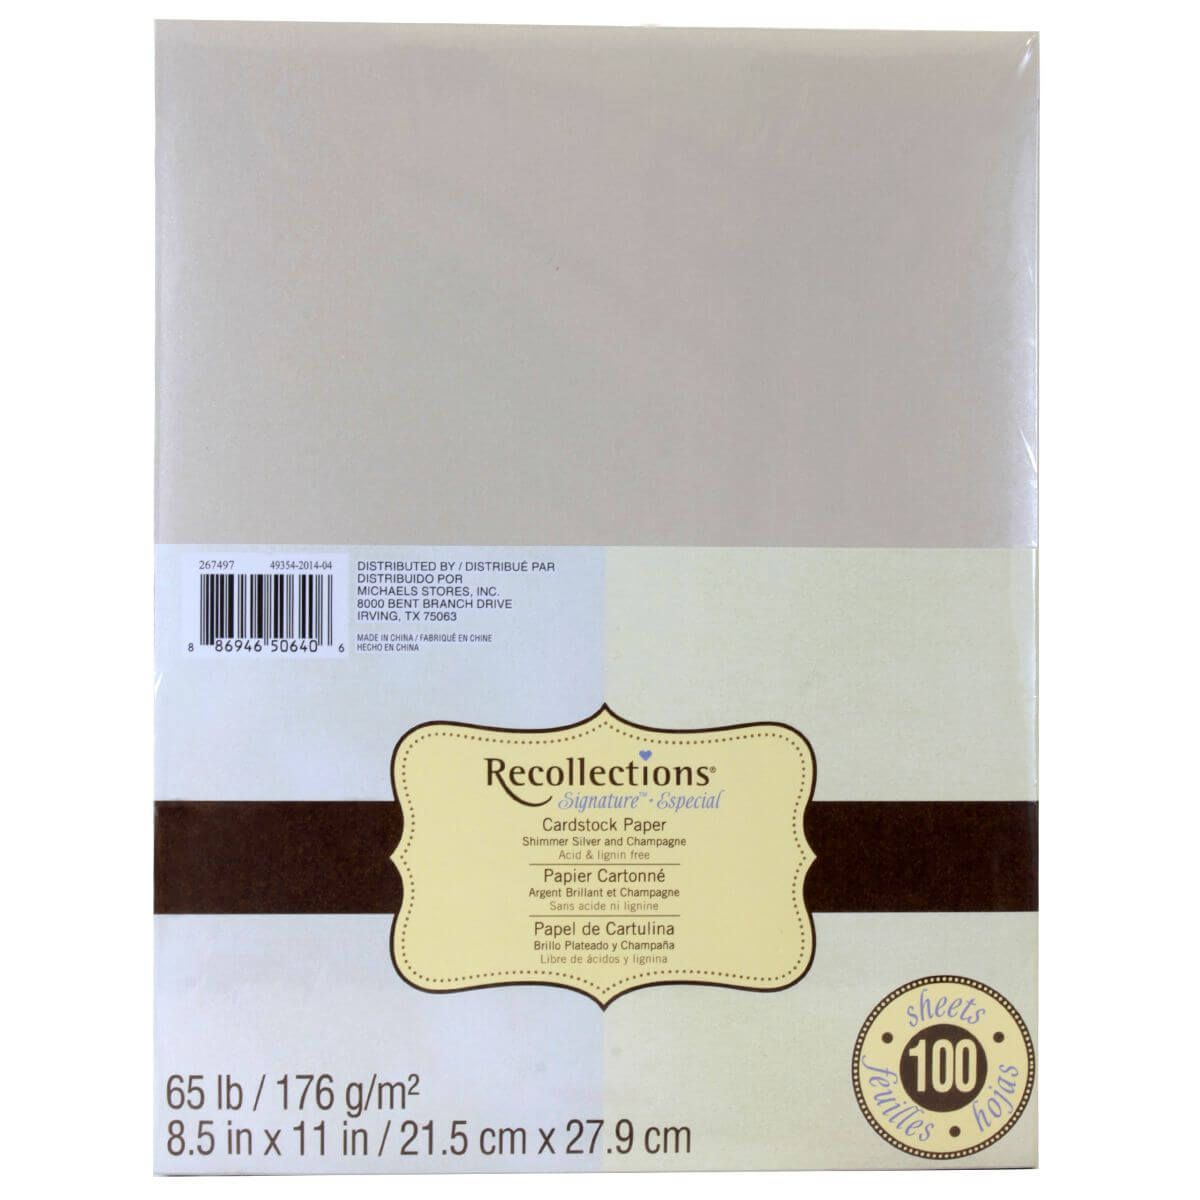 Shimmer Silver & Champagne Cardstock Paper Signature Intended For Recollections Card Template